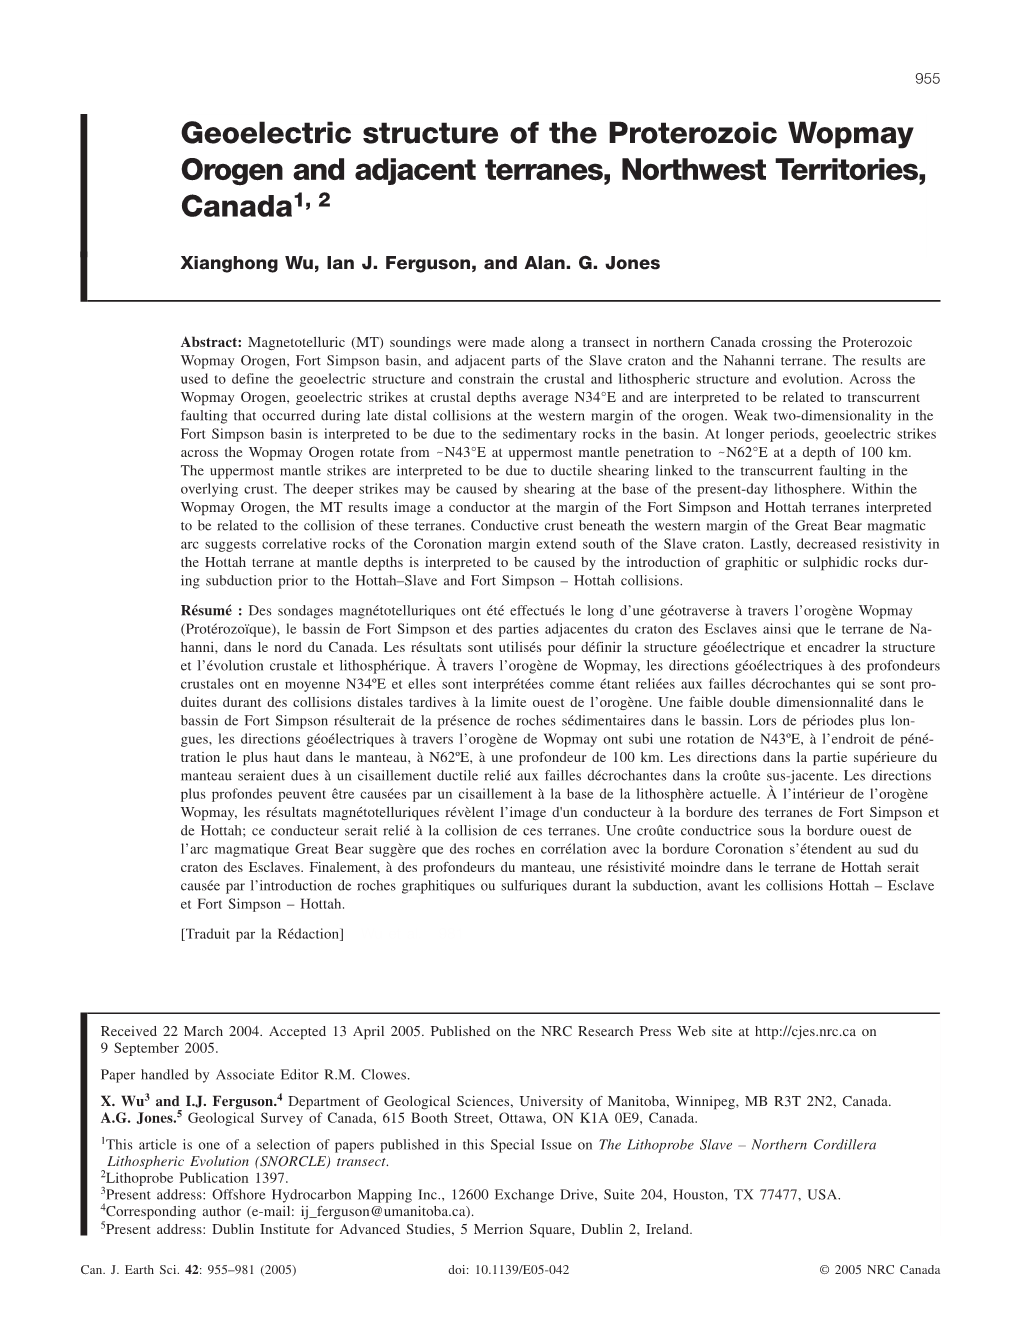 Geoelectric Structure of the Proterozoic Wopmay Orogen and Adjacent Terranes, Northwest Territories, Canada1, 2